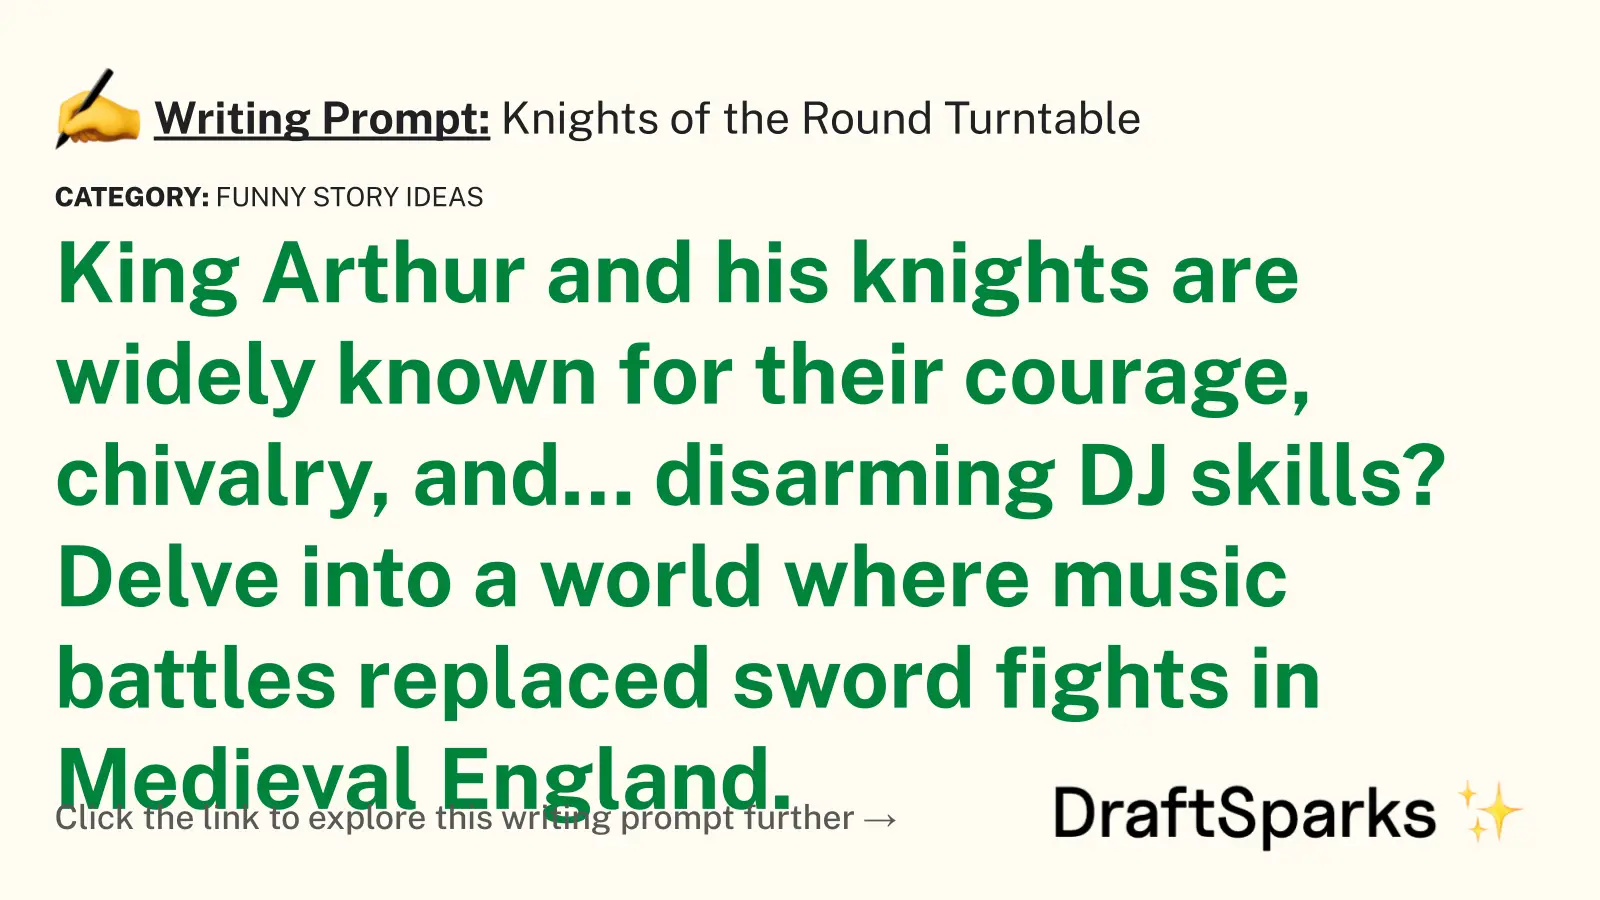 Knights of the Round Turntable